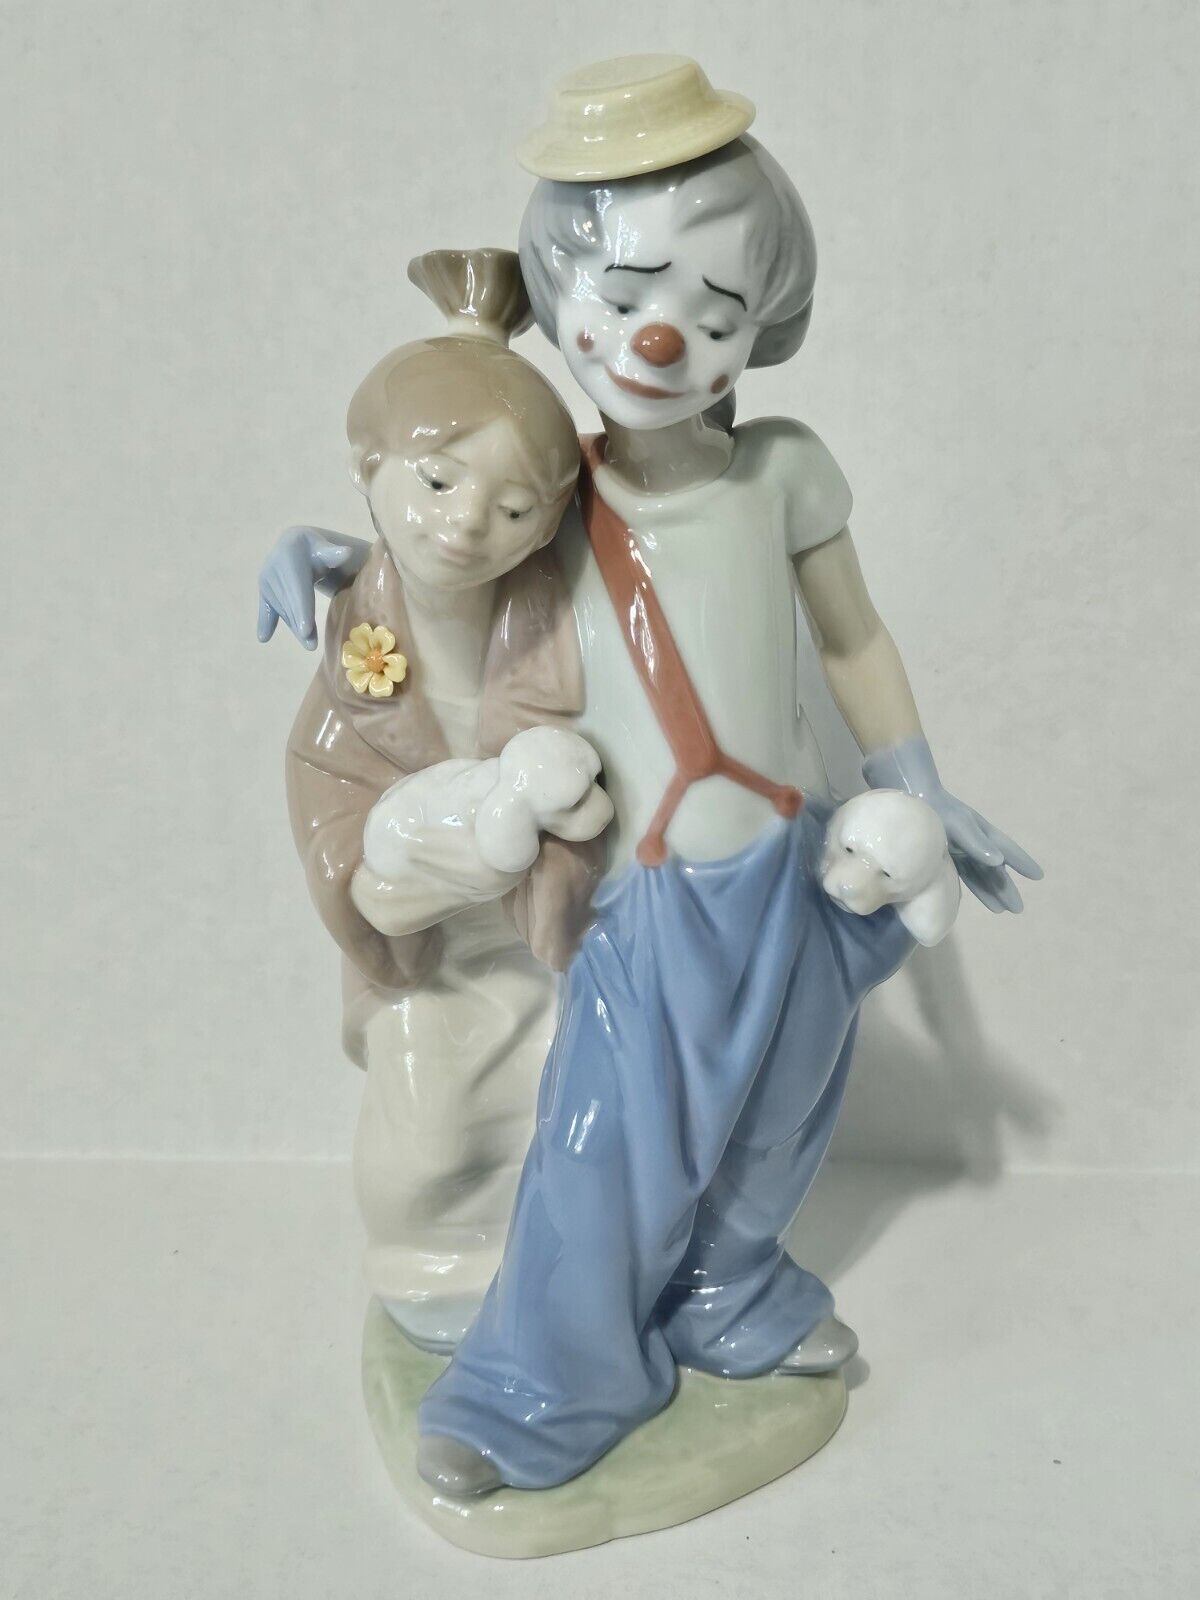 Lladro Pals Forever Porcelain Figurine #7686 Society 2000 - Clown Girl Puppies